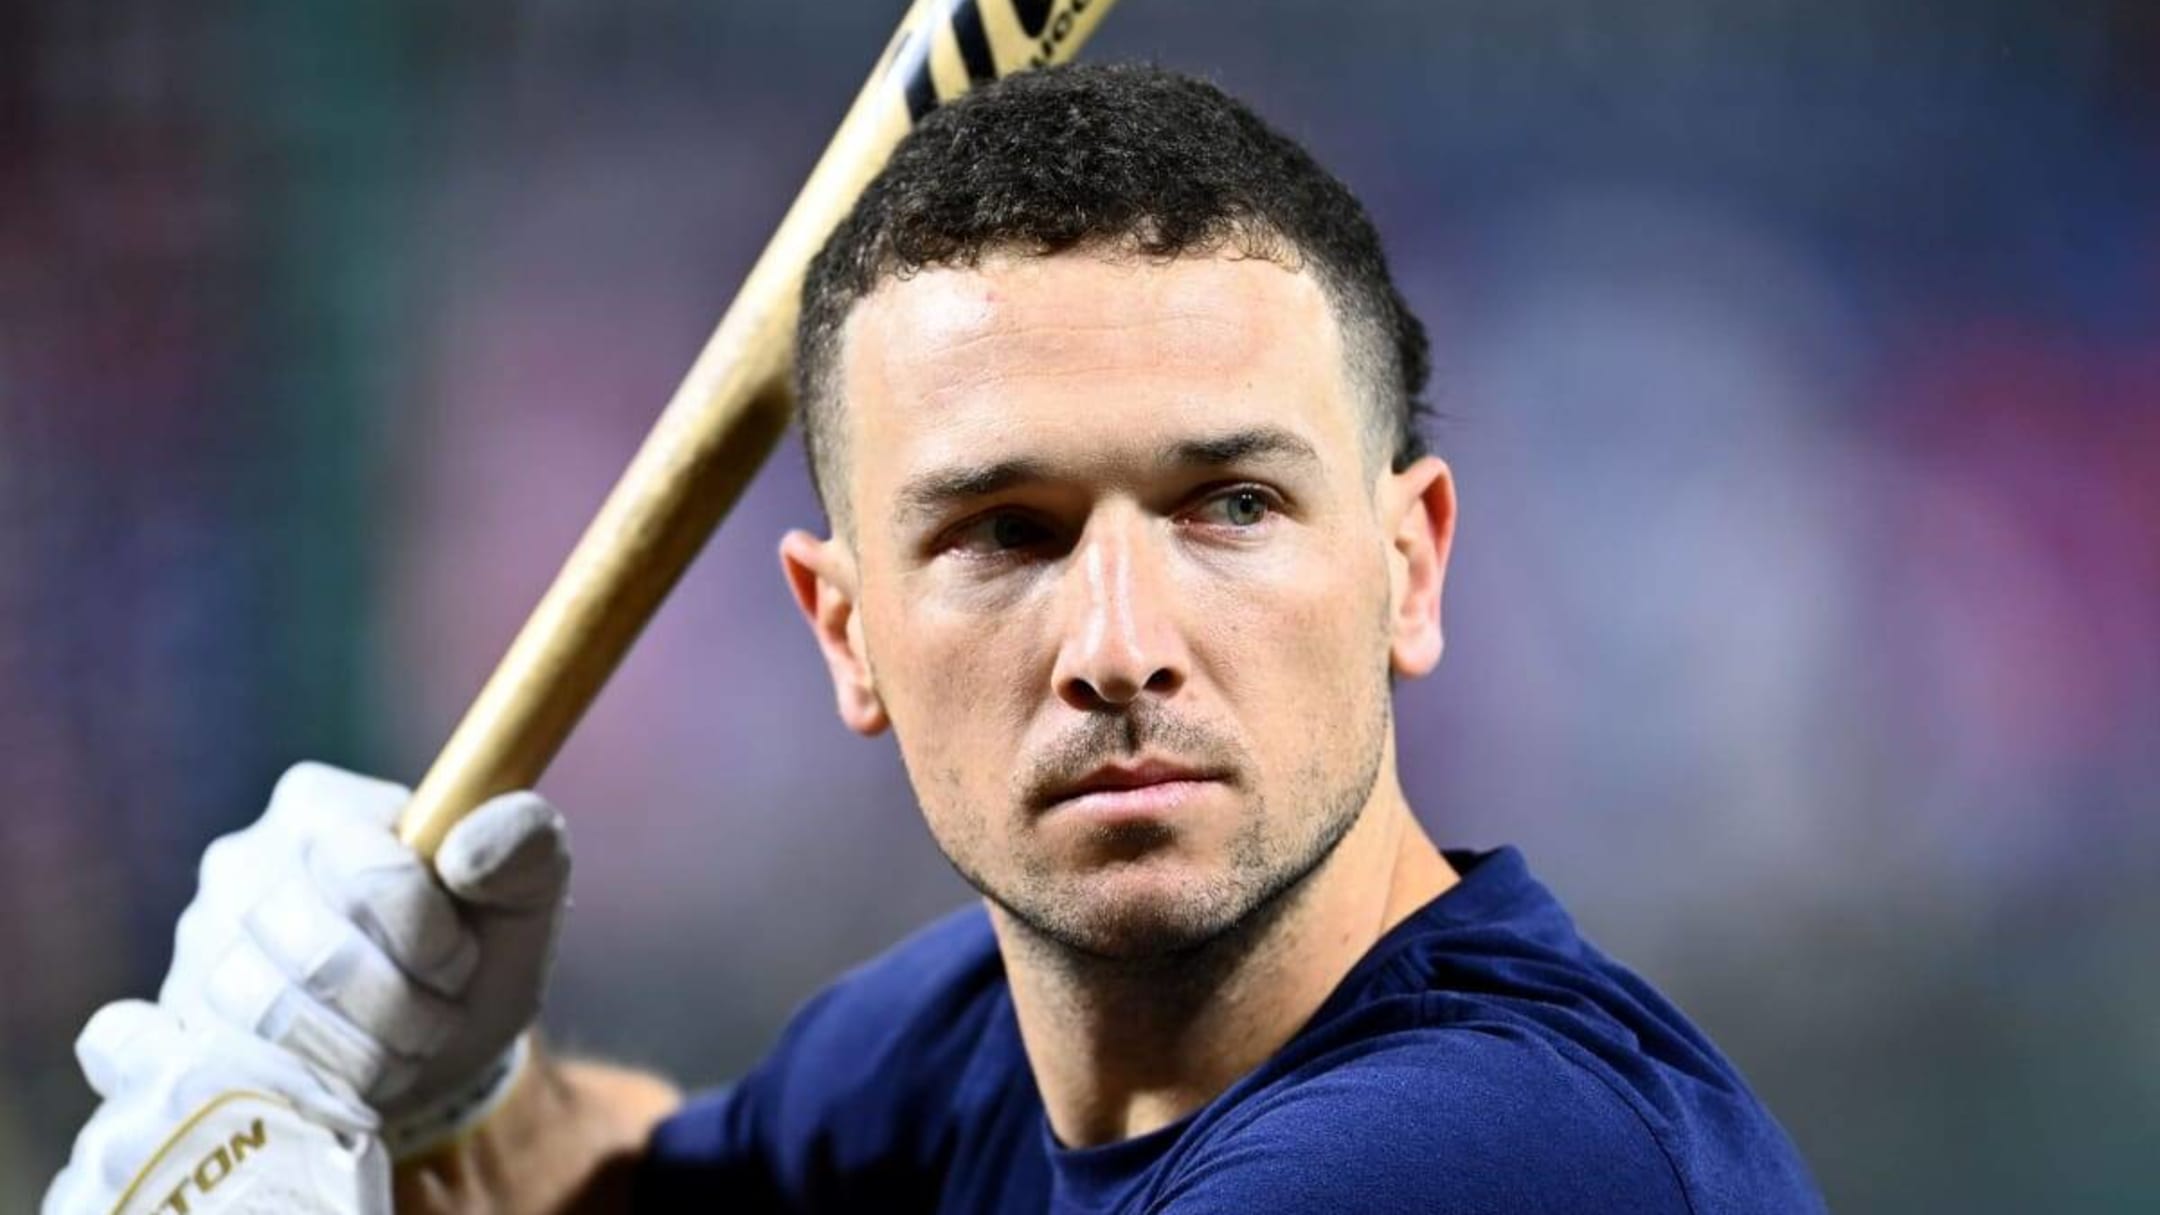 Alex Bregman Posts Christmas Picture with Wife and Baby on